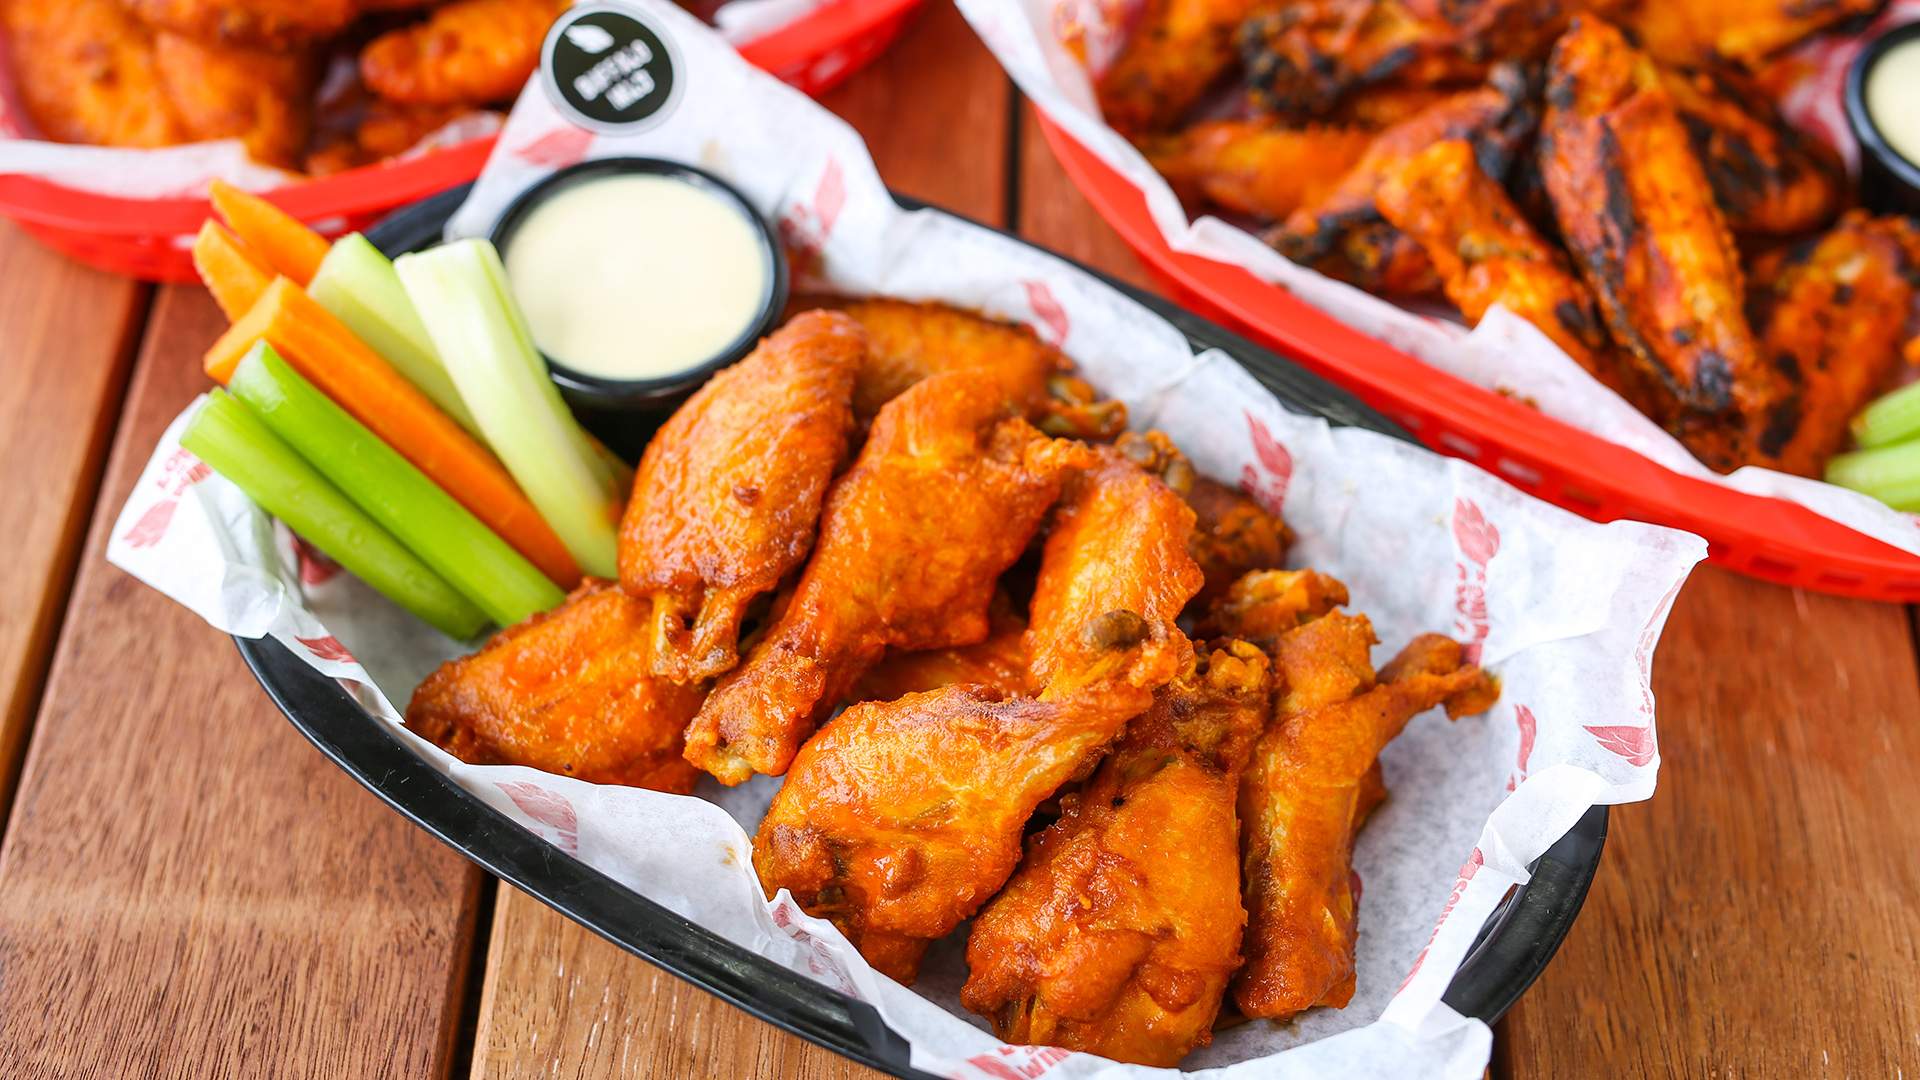 Lord of the Wings Is Giving Away Free Wings This Saturday